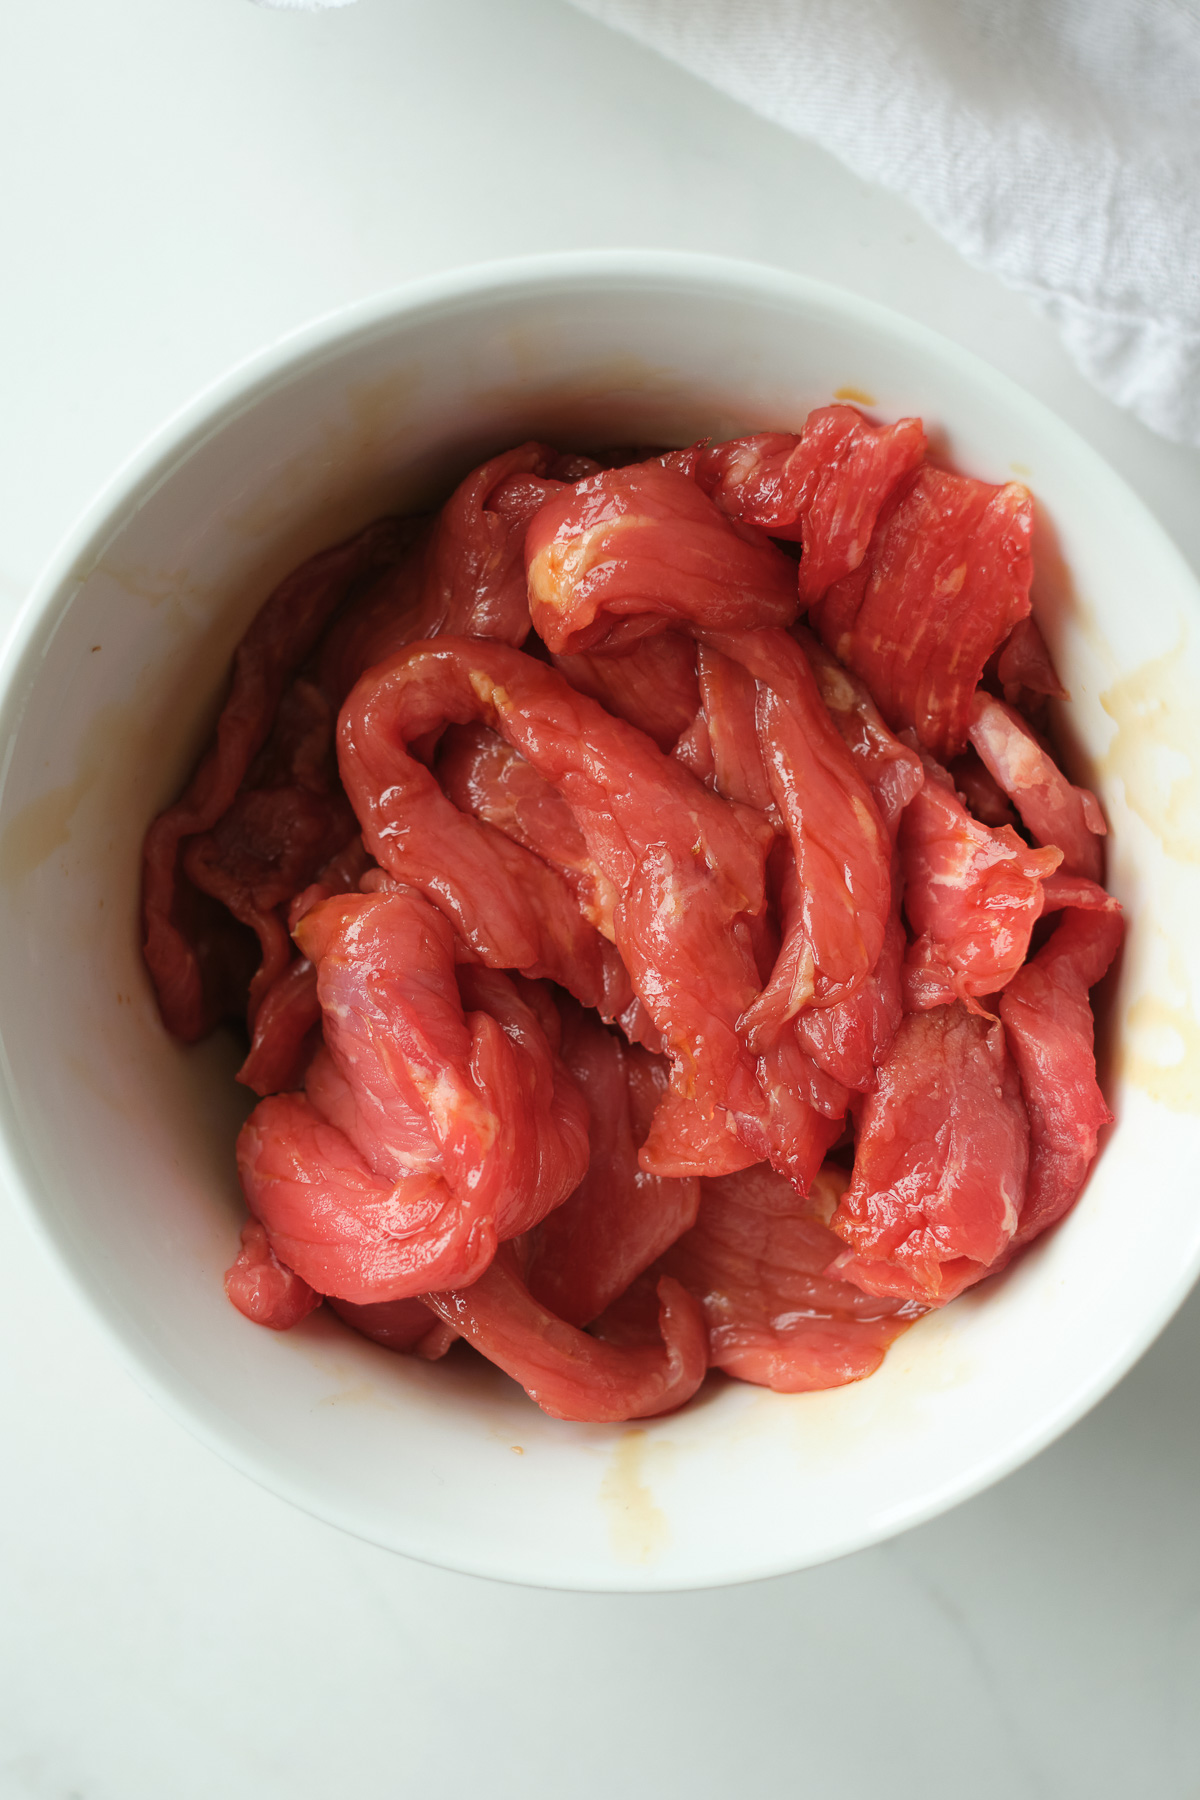 Top down view of raw Beef in a white bowl.